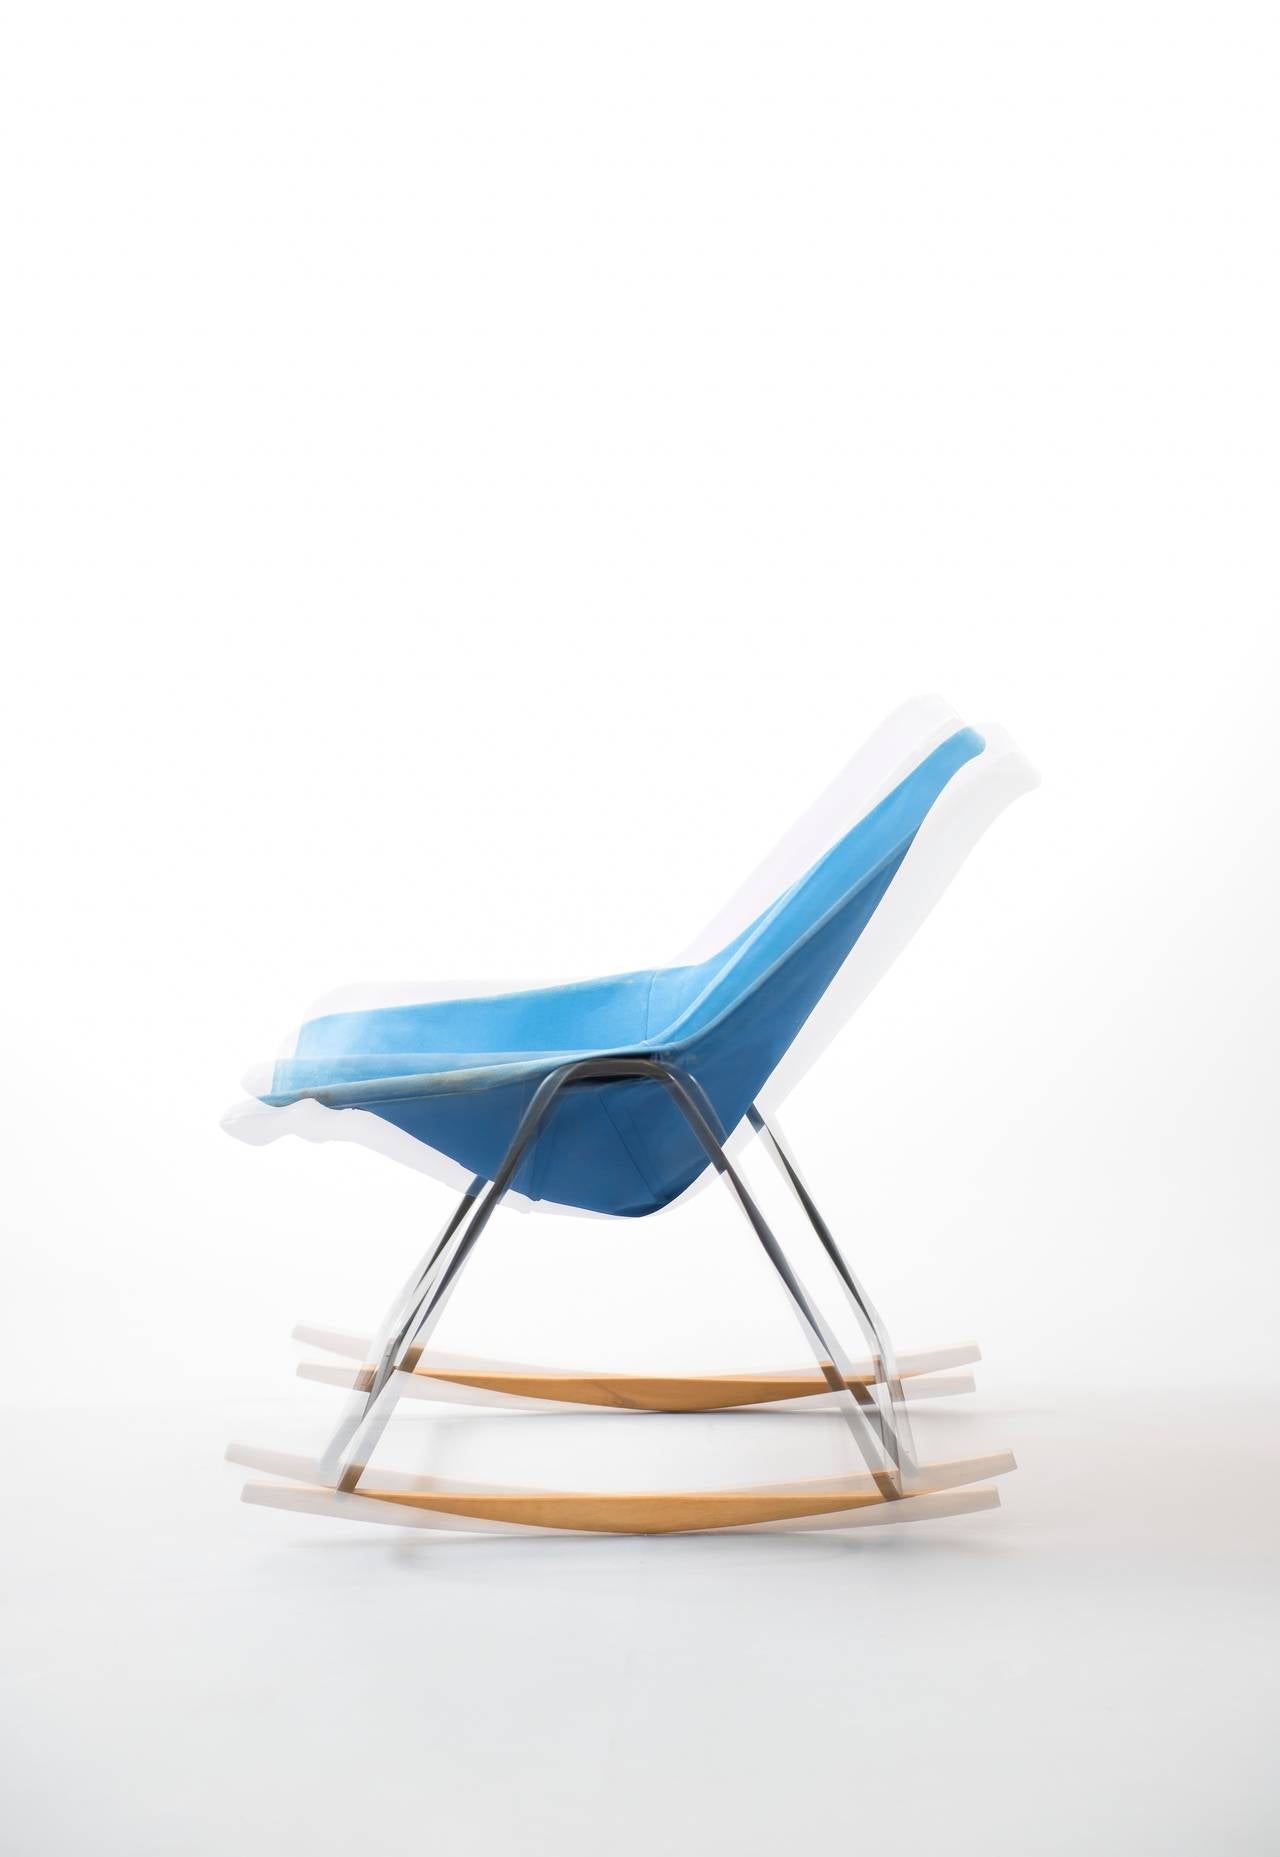 Fabric Rocking chair G1 by Pierre Guariche - Airborne edition - 1953 For Sale